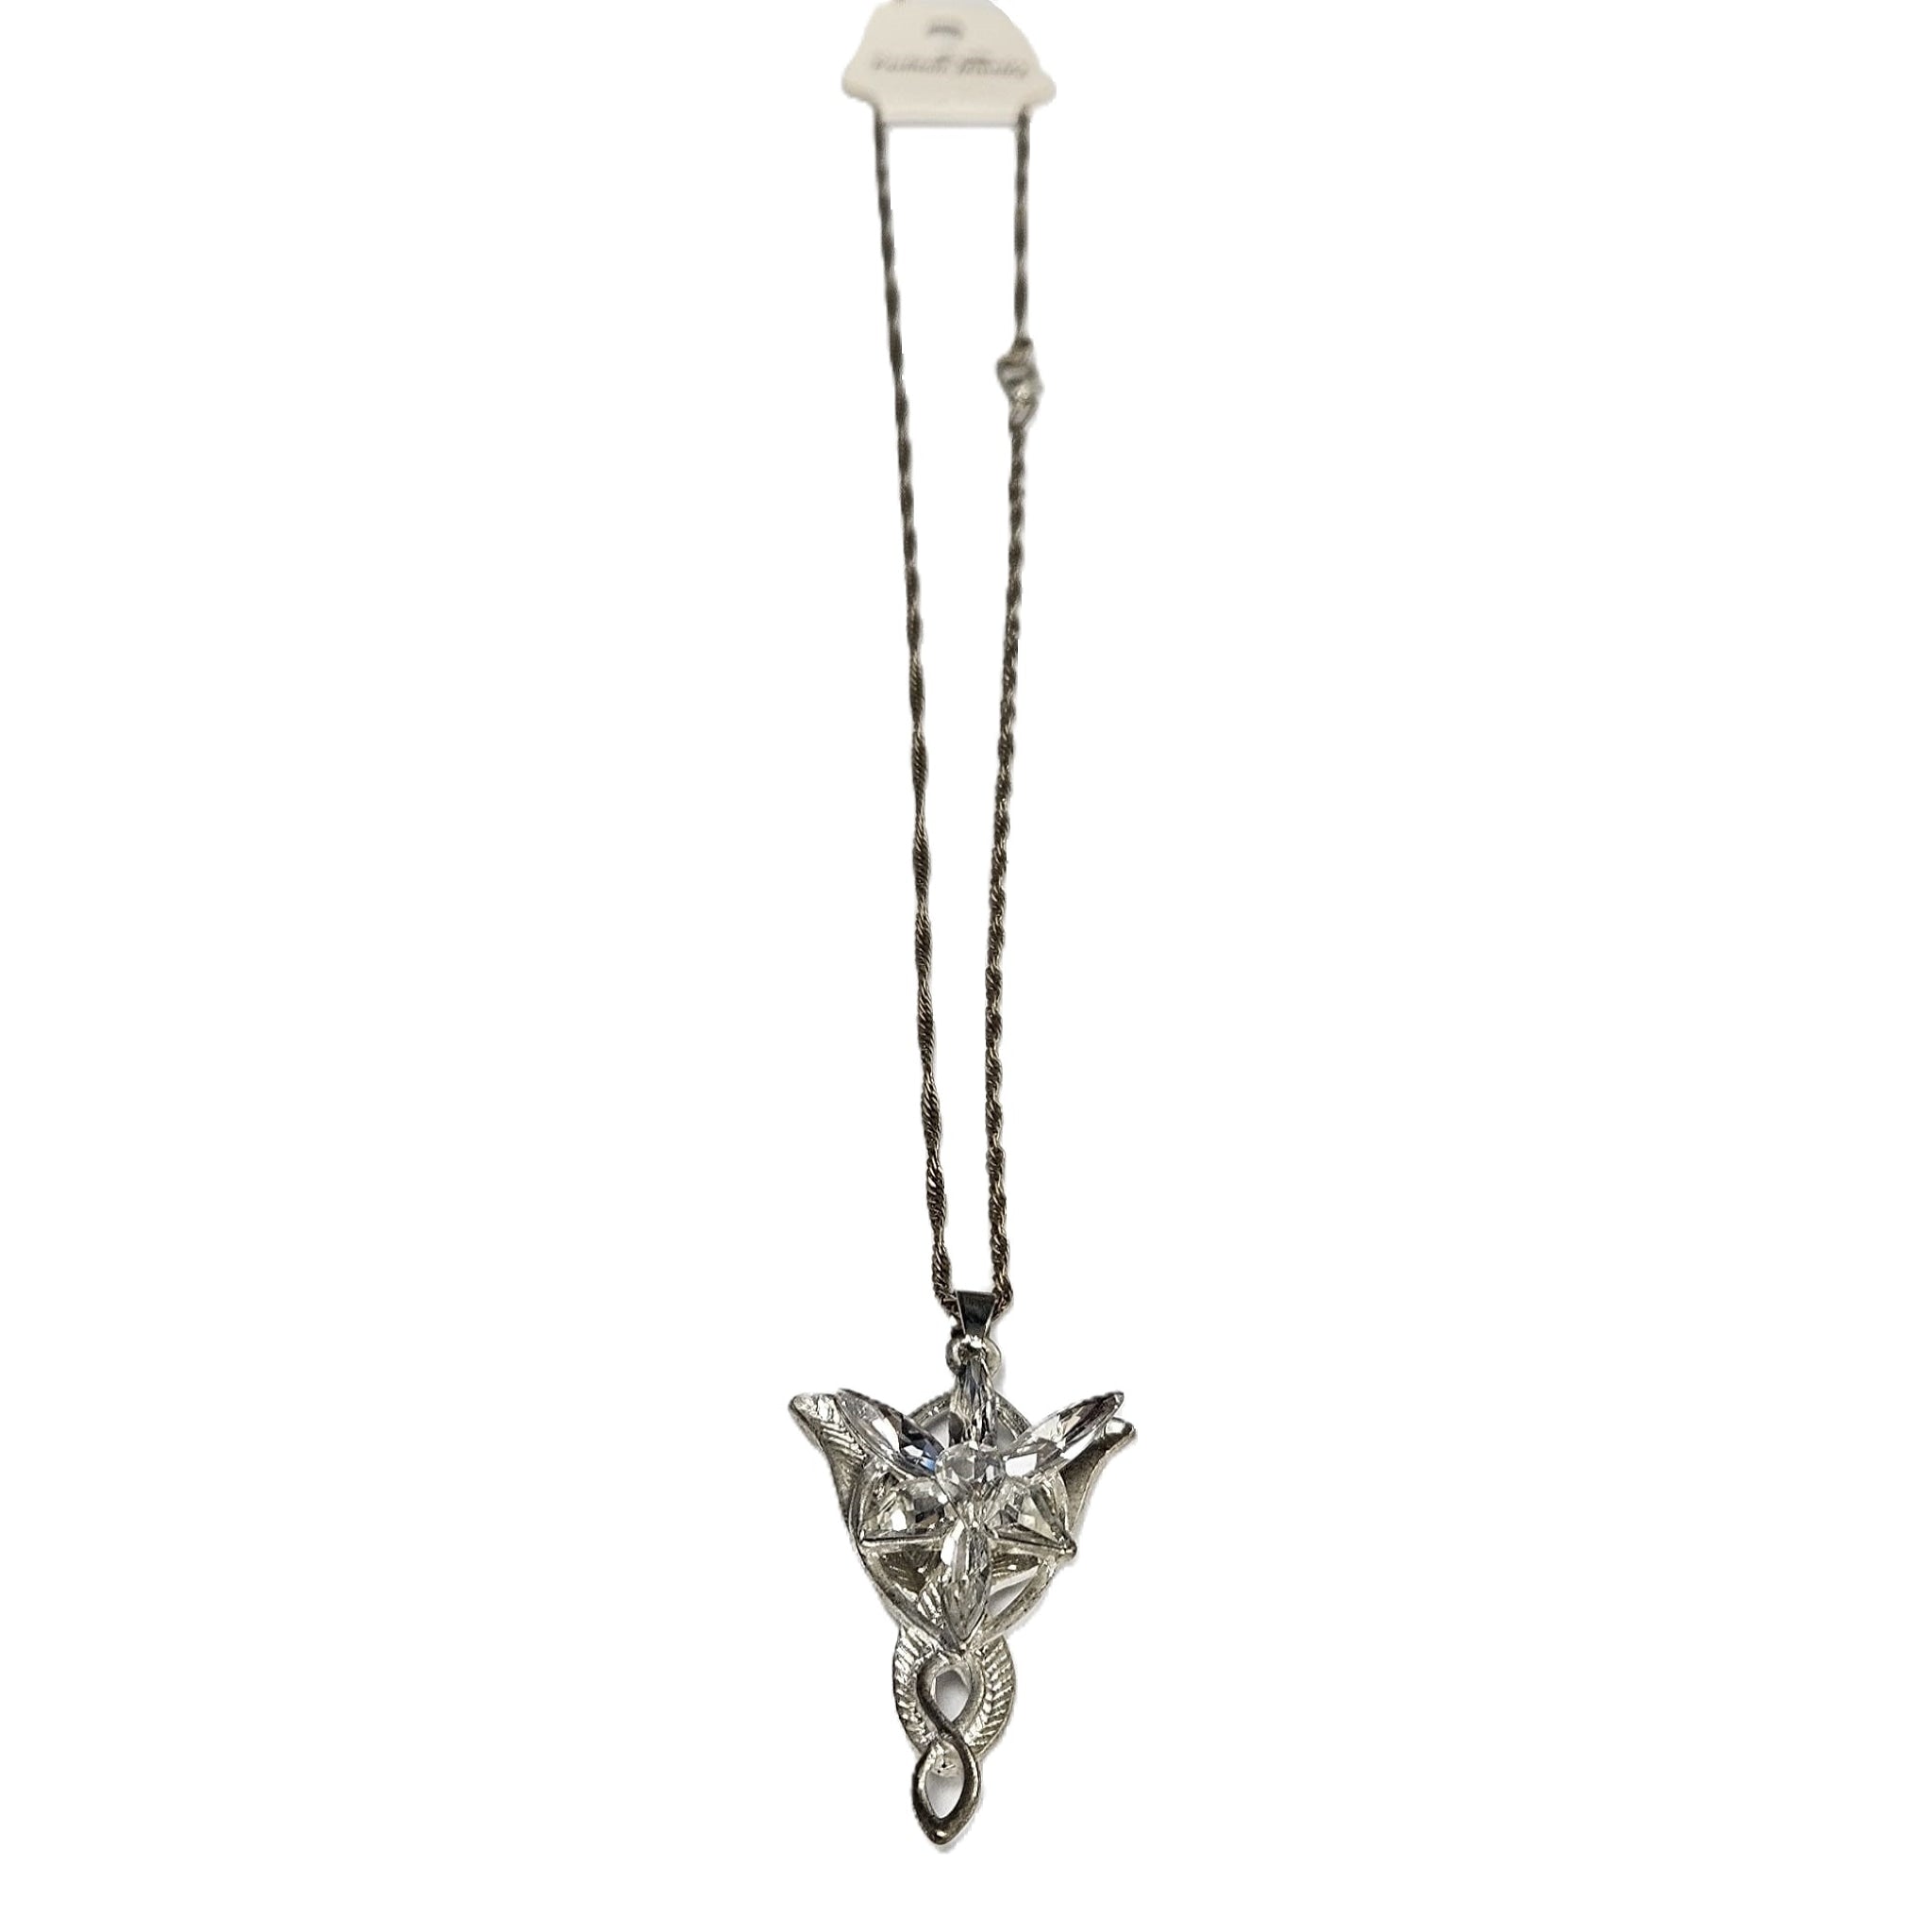 Lord of the Rings Arwen's Evenstar Necklace Prop Replica EX DISPLAY